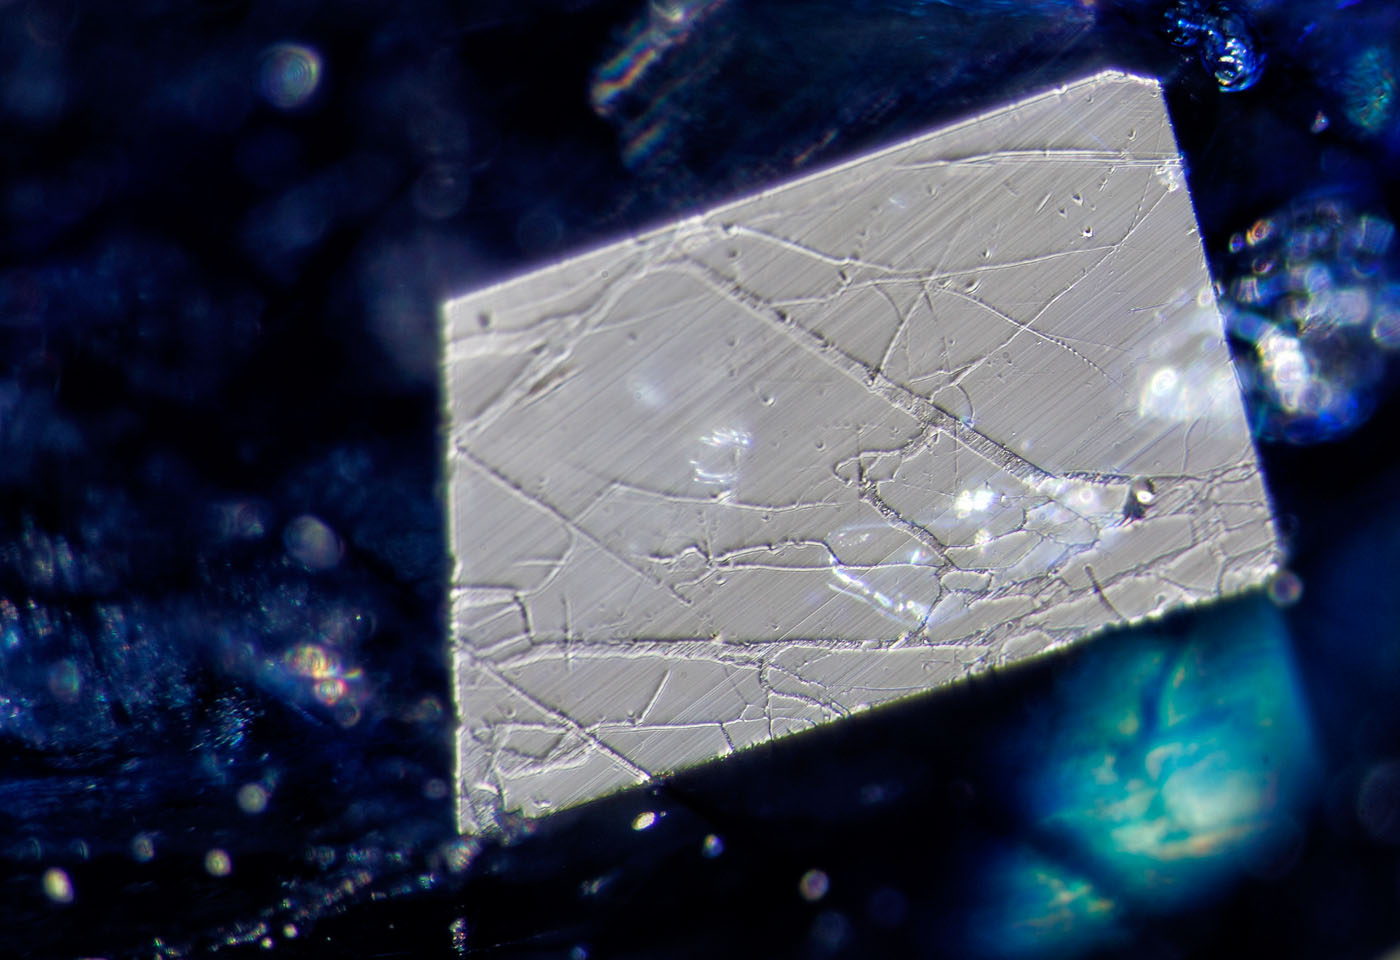 Figure 10. A small facet viewed in reflected light reveals a network of fissures filled with glass. The low hardness of the glass shows serious undercutting compared with the surrounding sapphire. Surface-incident fiber-optic illumination. Photo: Wimon Manorotkul